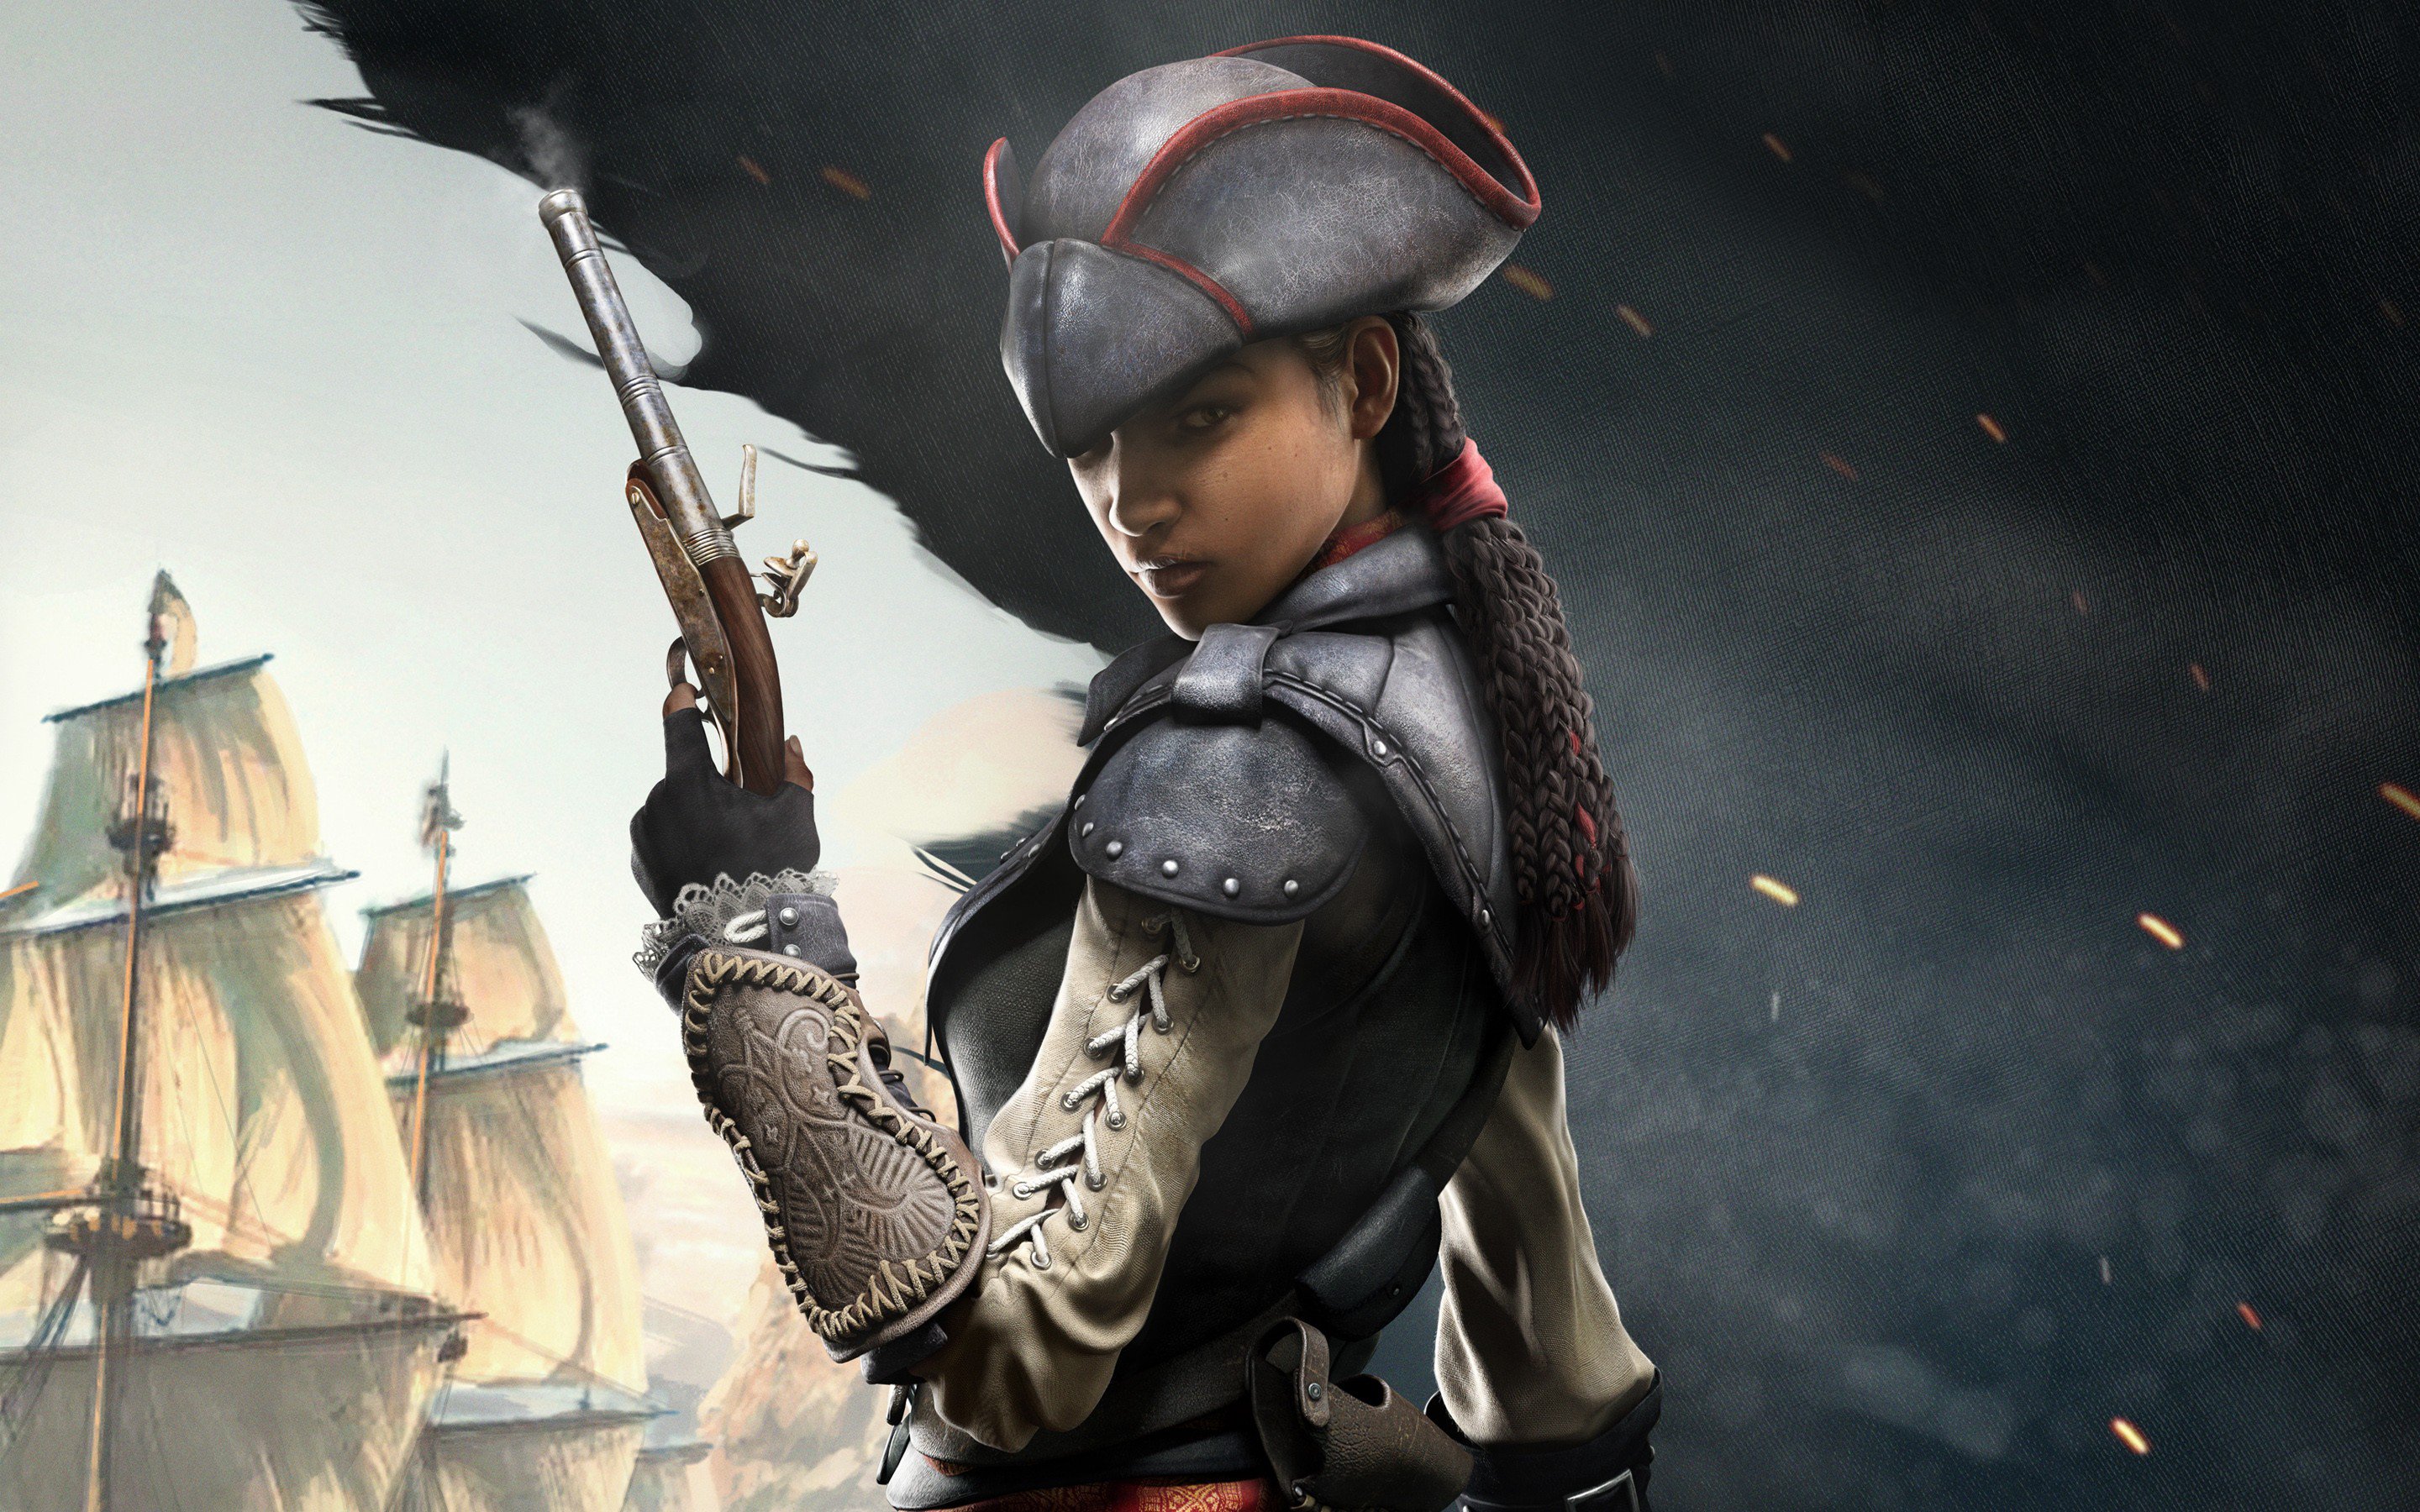 Aveline Assassins Creed 4 Hd Games 4k Wallpapers Images